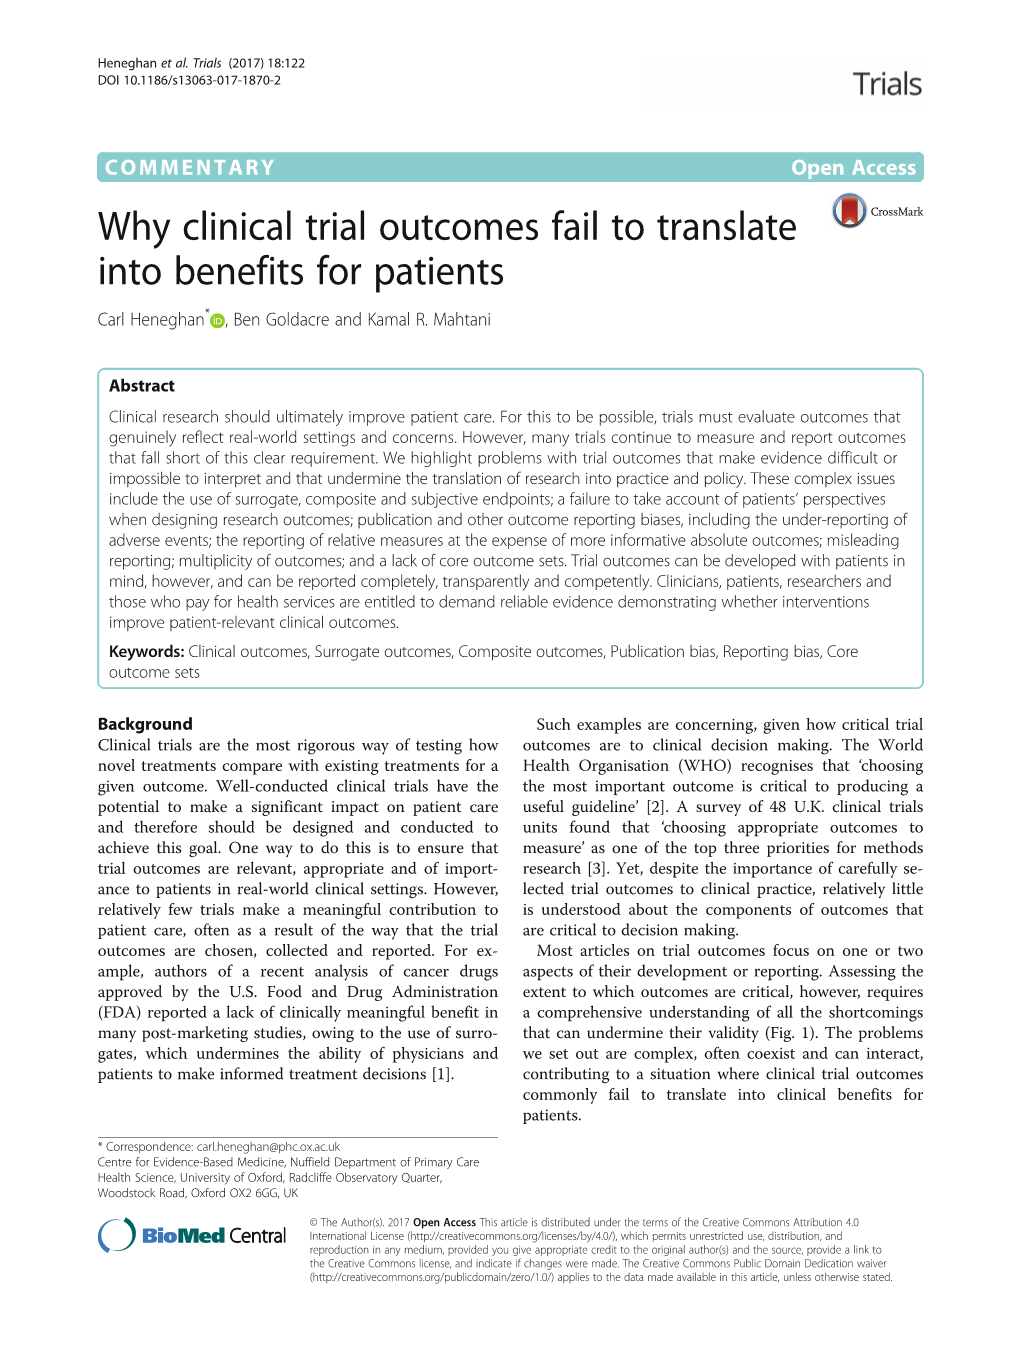 Why Clinical Trial Outcomes Fail to Translate Into Benefits for Patients Carl Heneghan* , Ben Goldacre and Kamal R